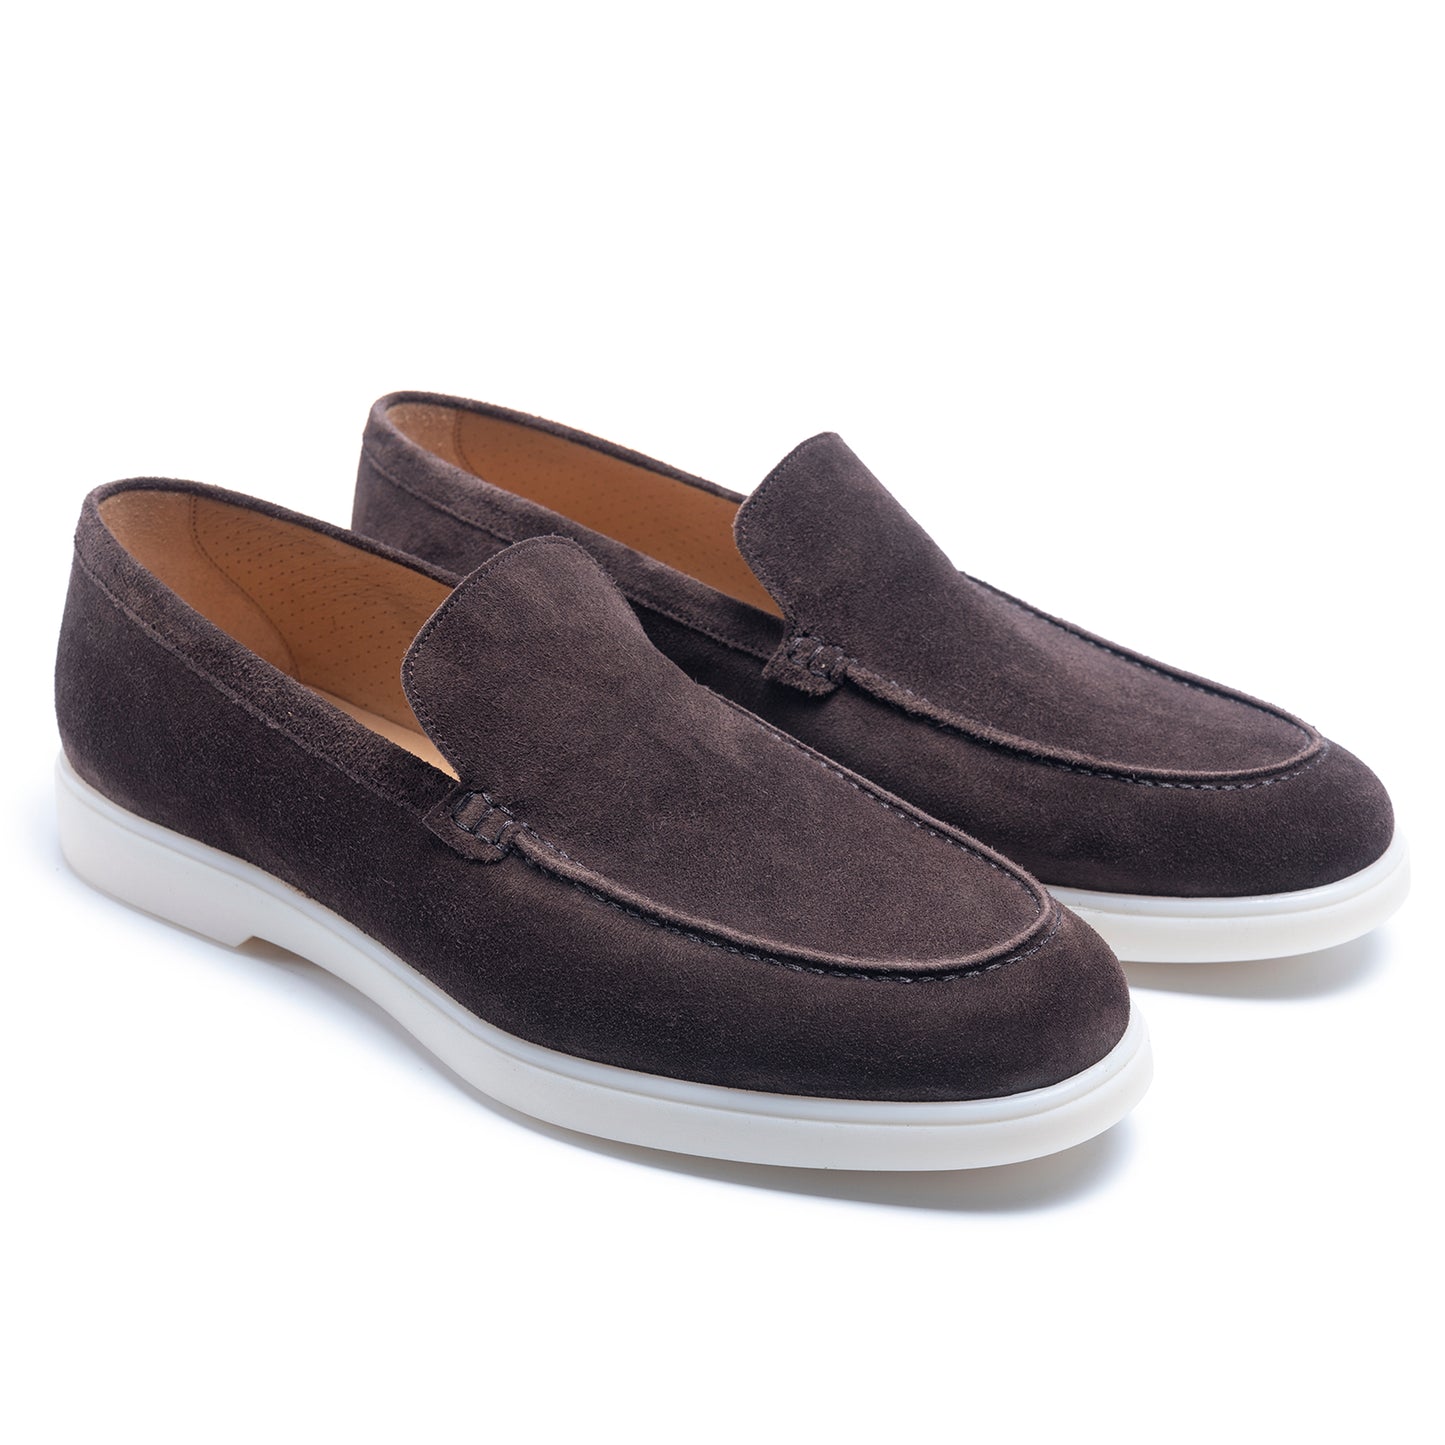 TLB Mallorca leather shoes 2009 / SOMMELIER / SUEDE BROWN